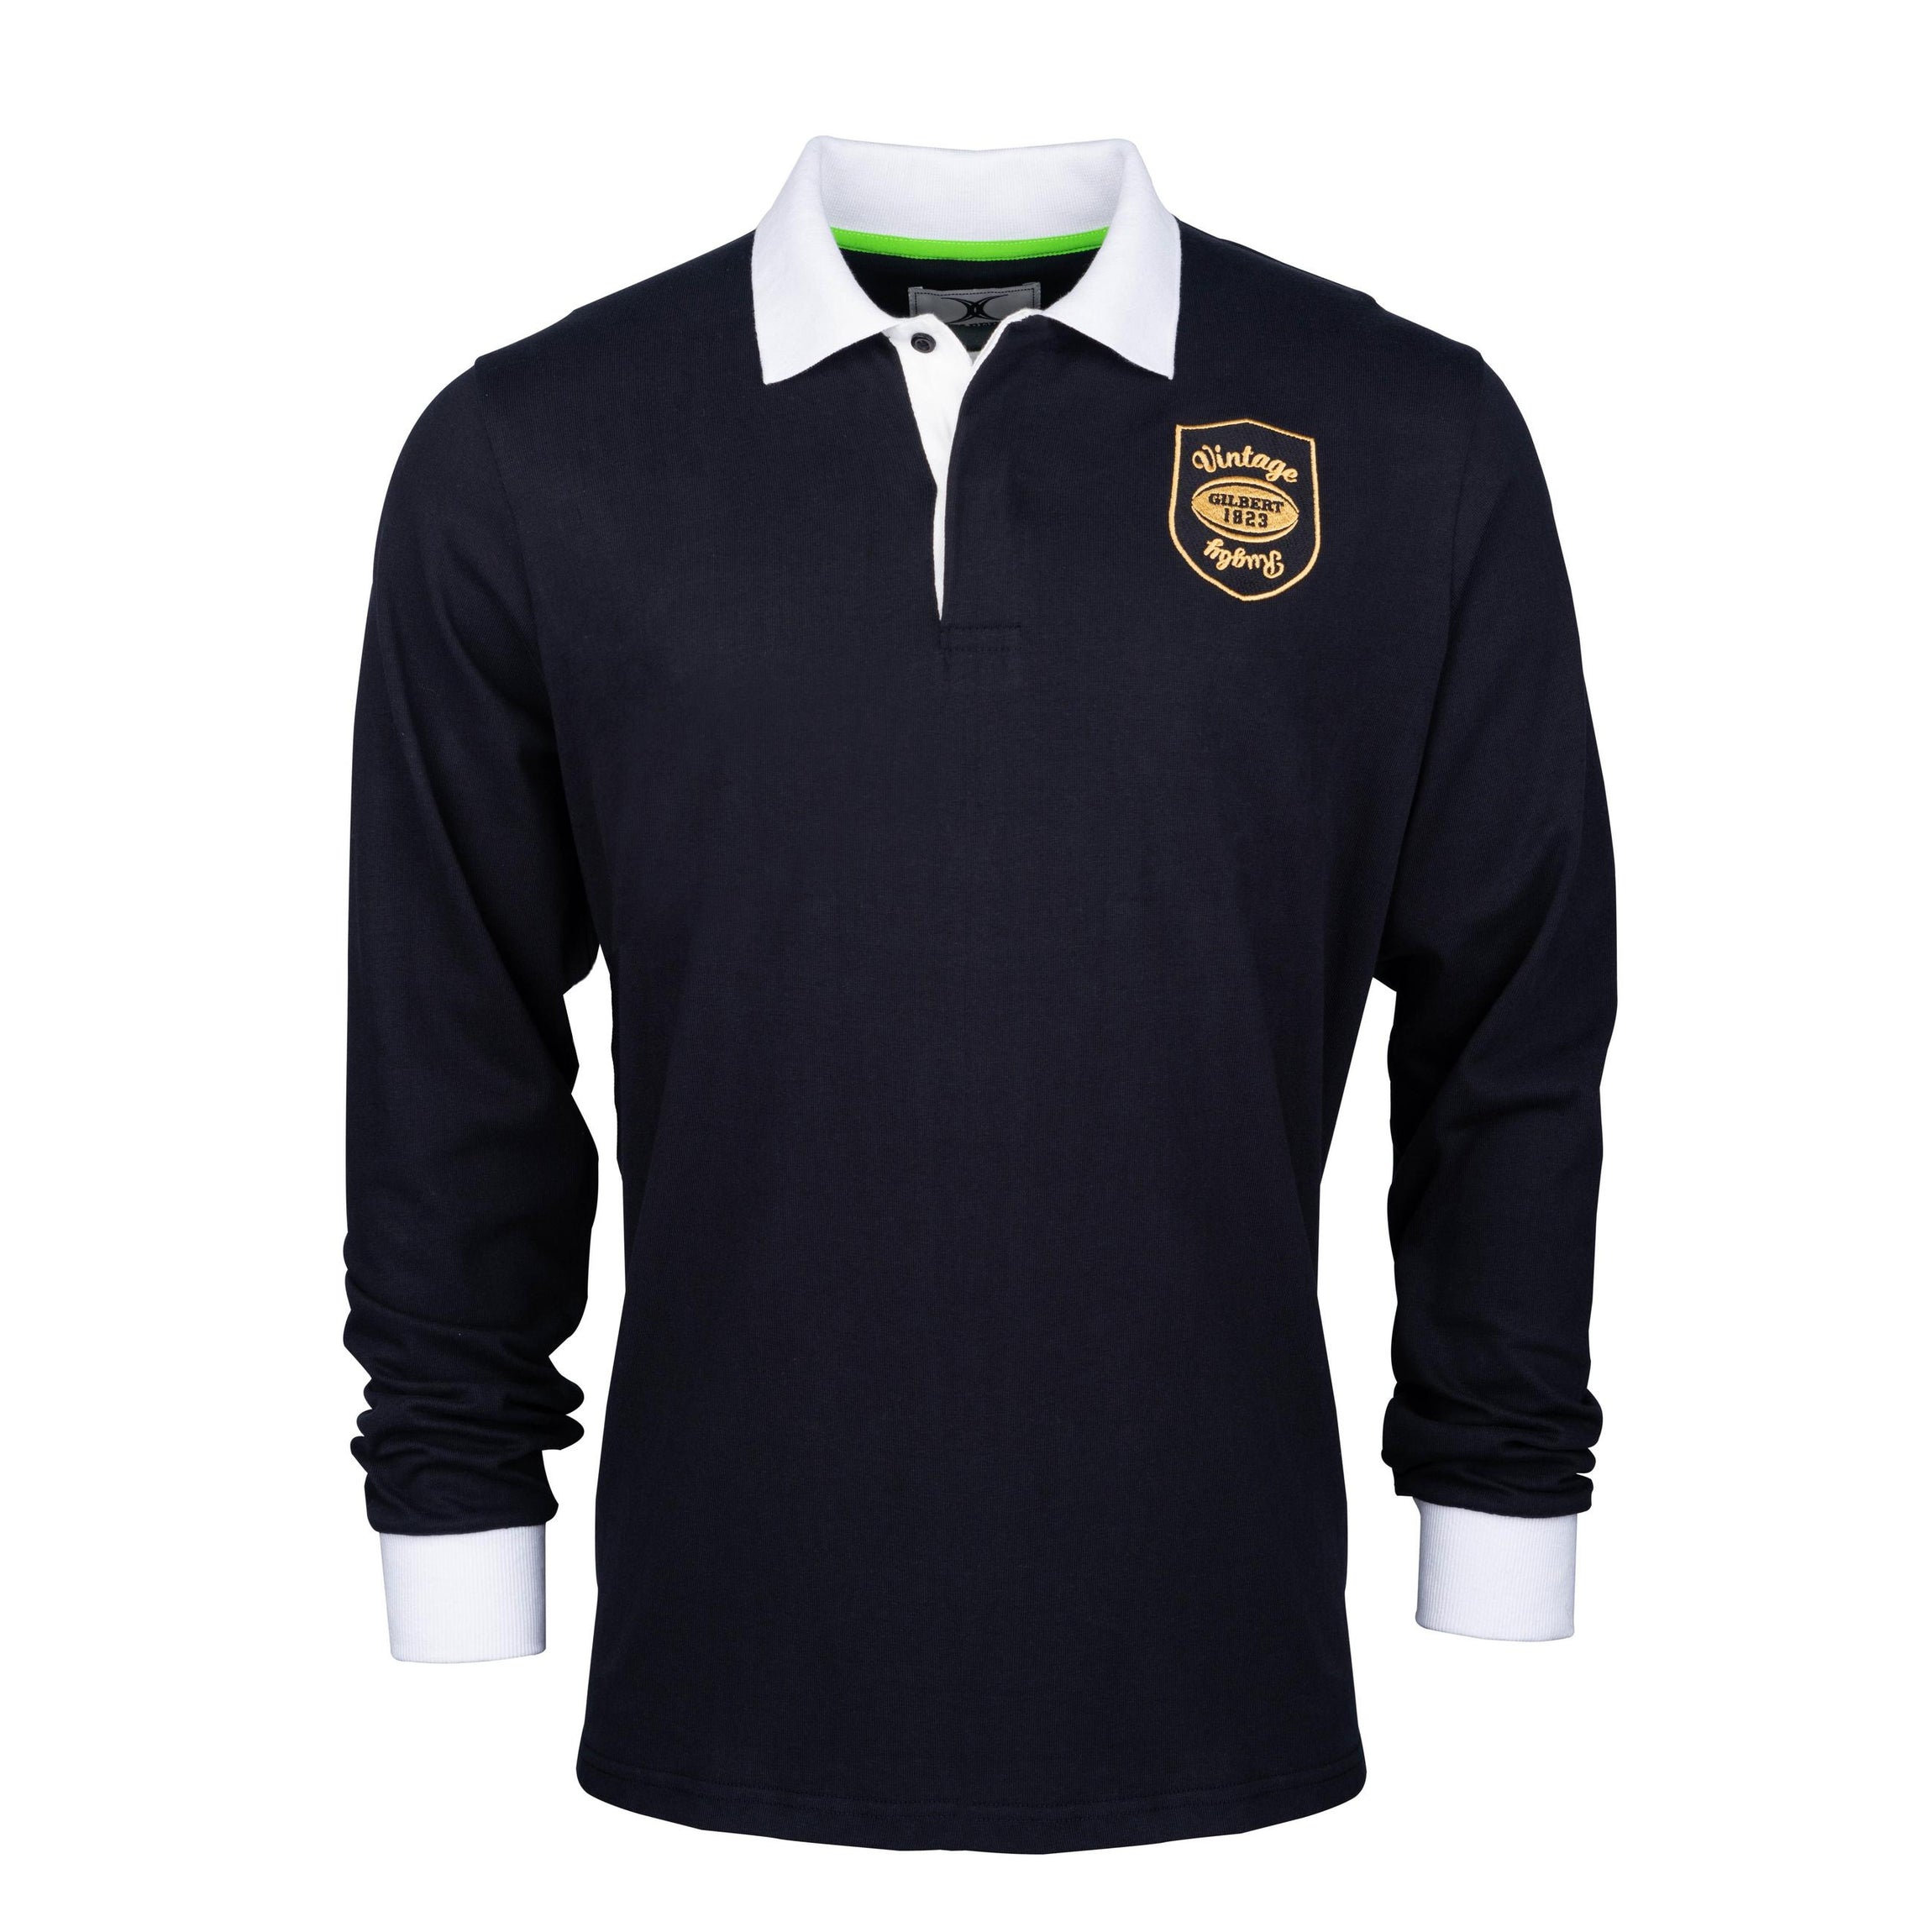 Gilbert Rugby Clothing | Clothing made for Rugby